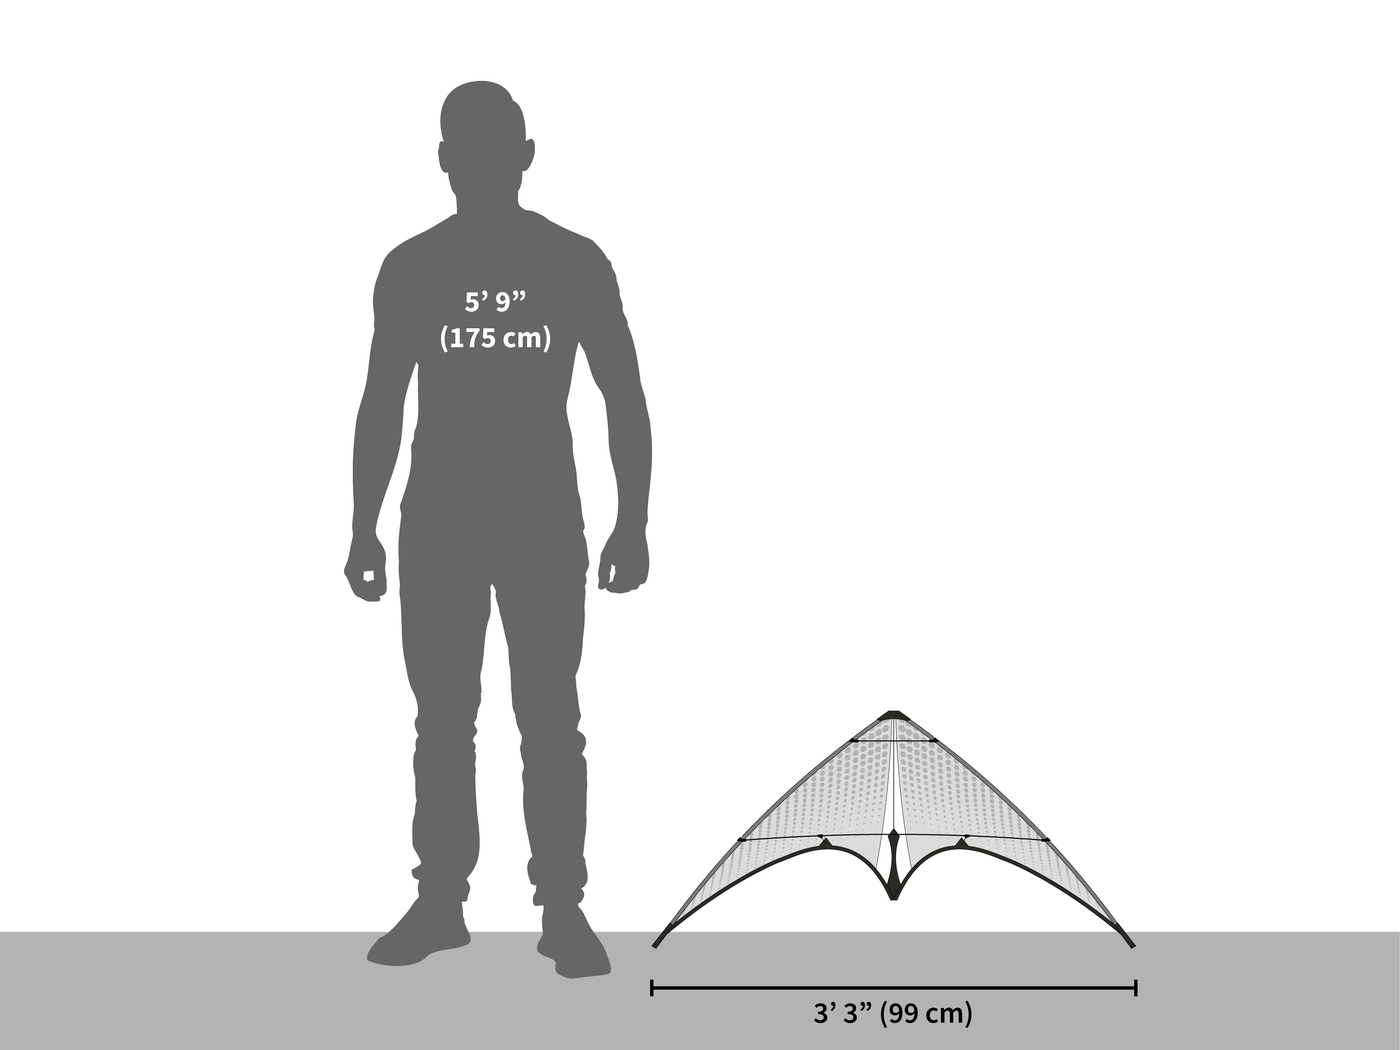 A diagram illustrating the size of the Neutrino in comparison to a 5 foot 9 inch tall man.